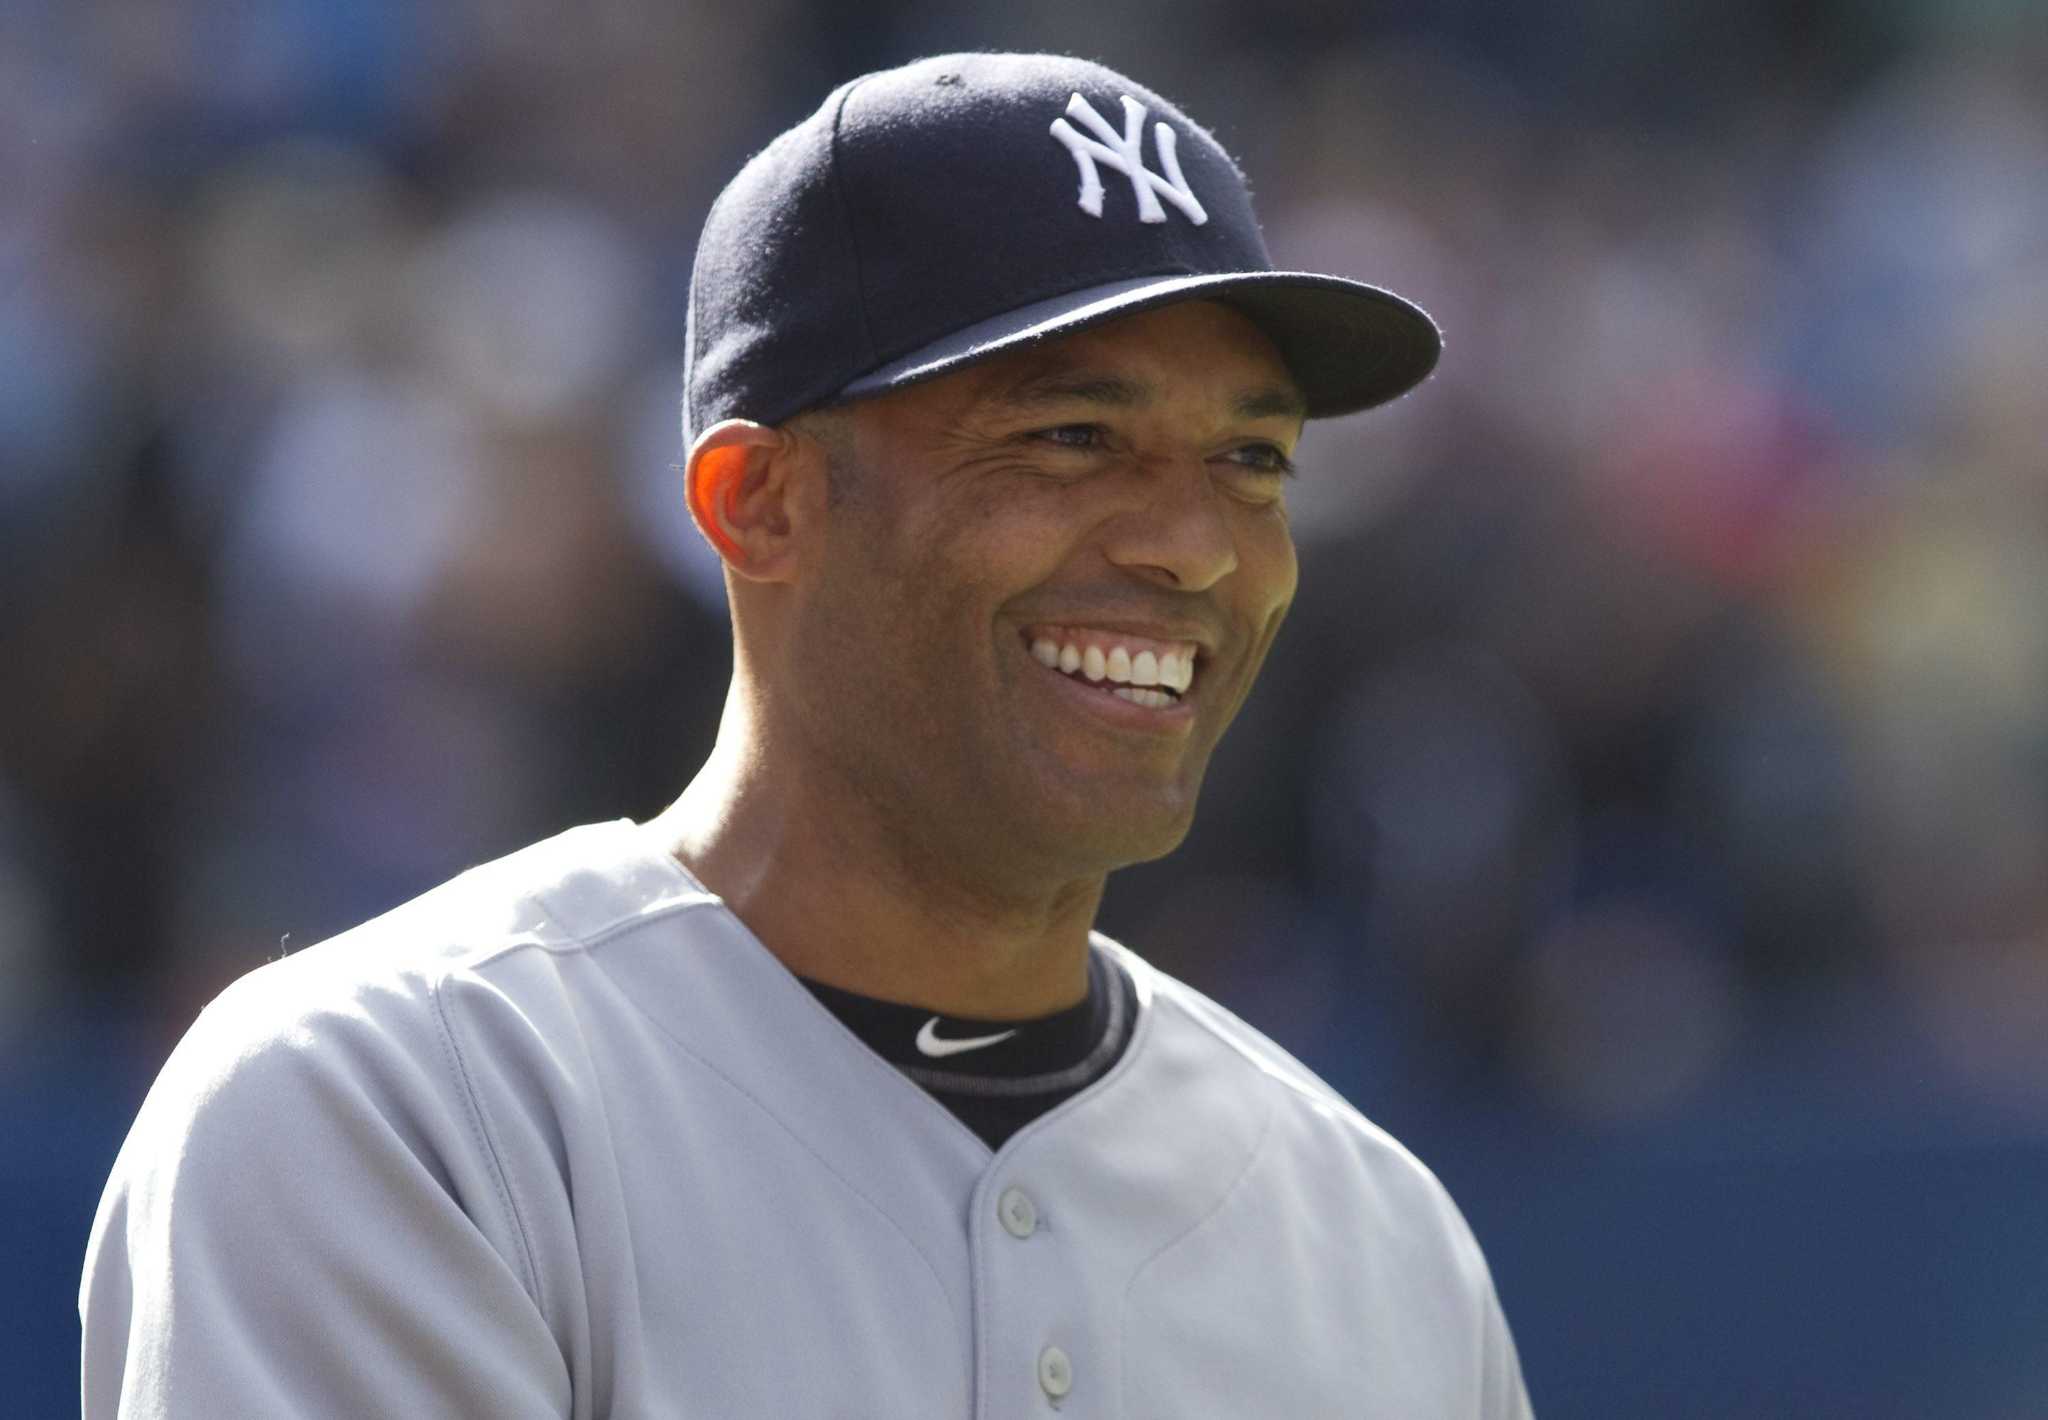 Mariano Rivera to join Family and Children's Aid for annual golf fundraiser